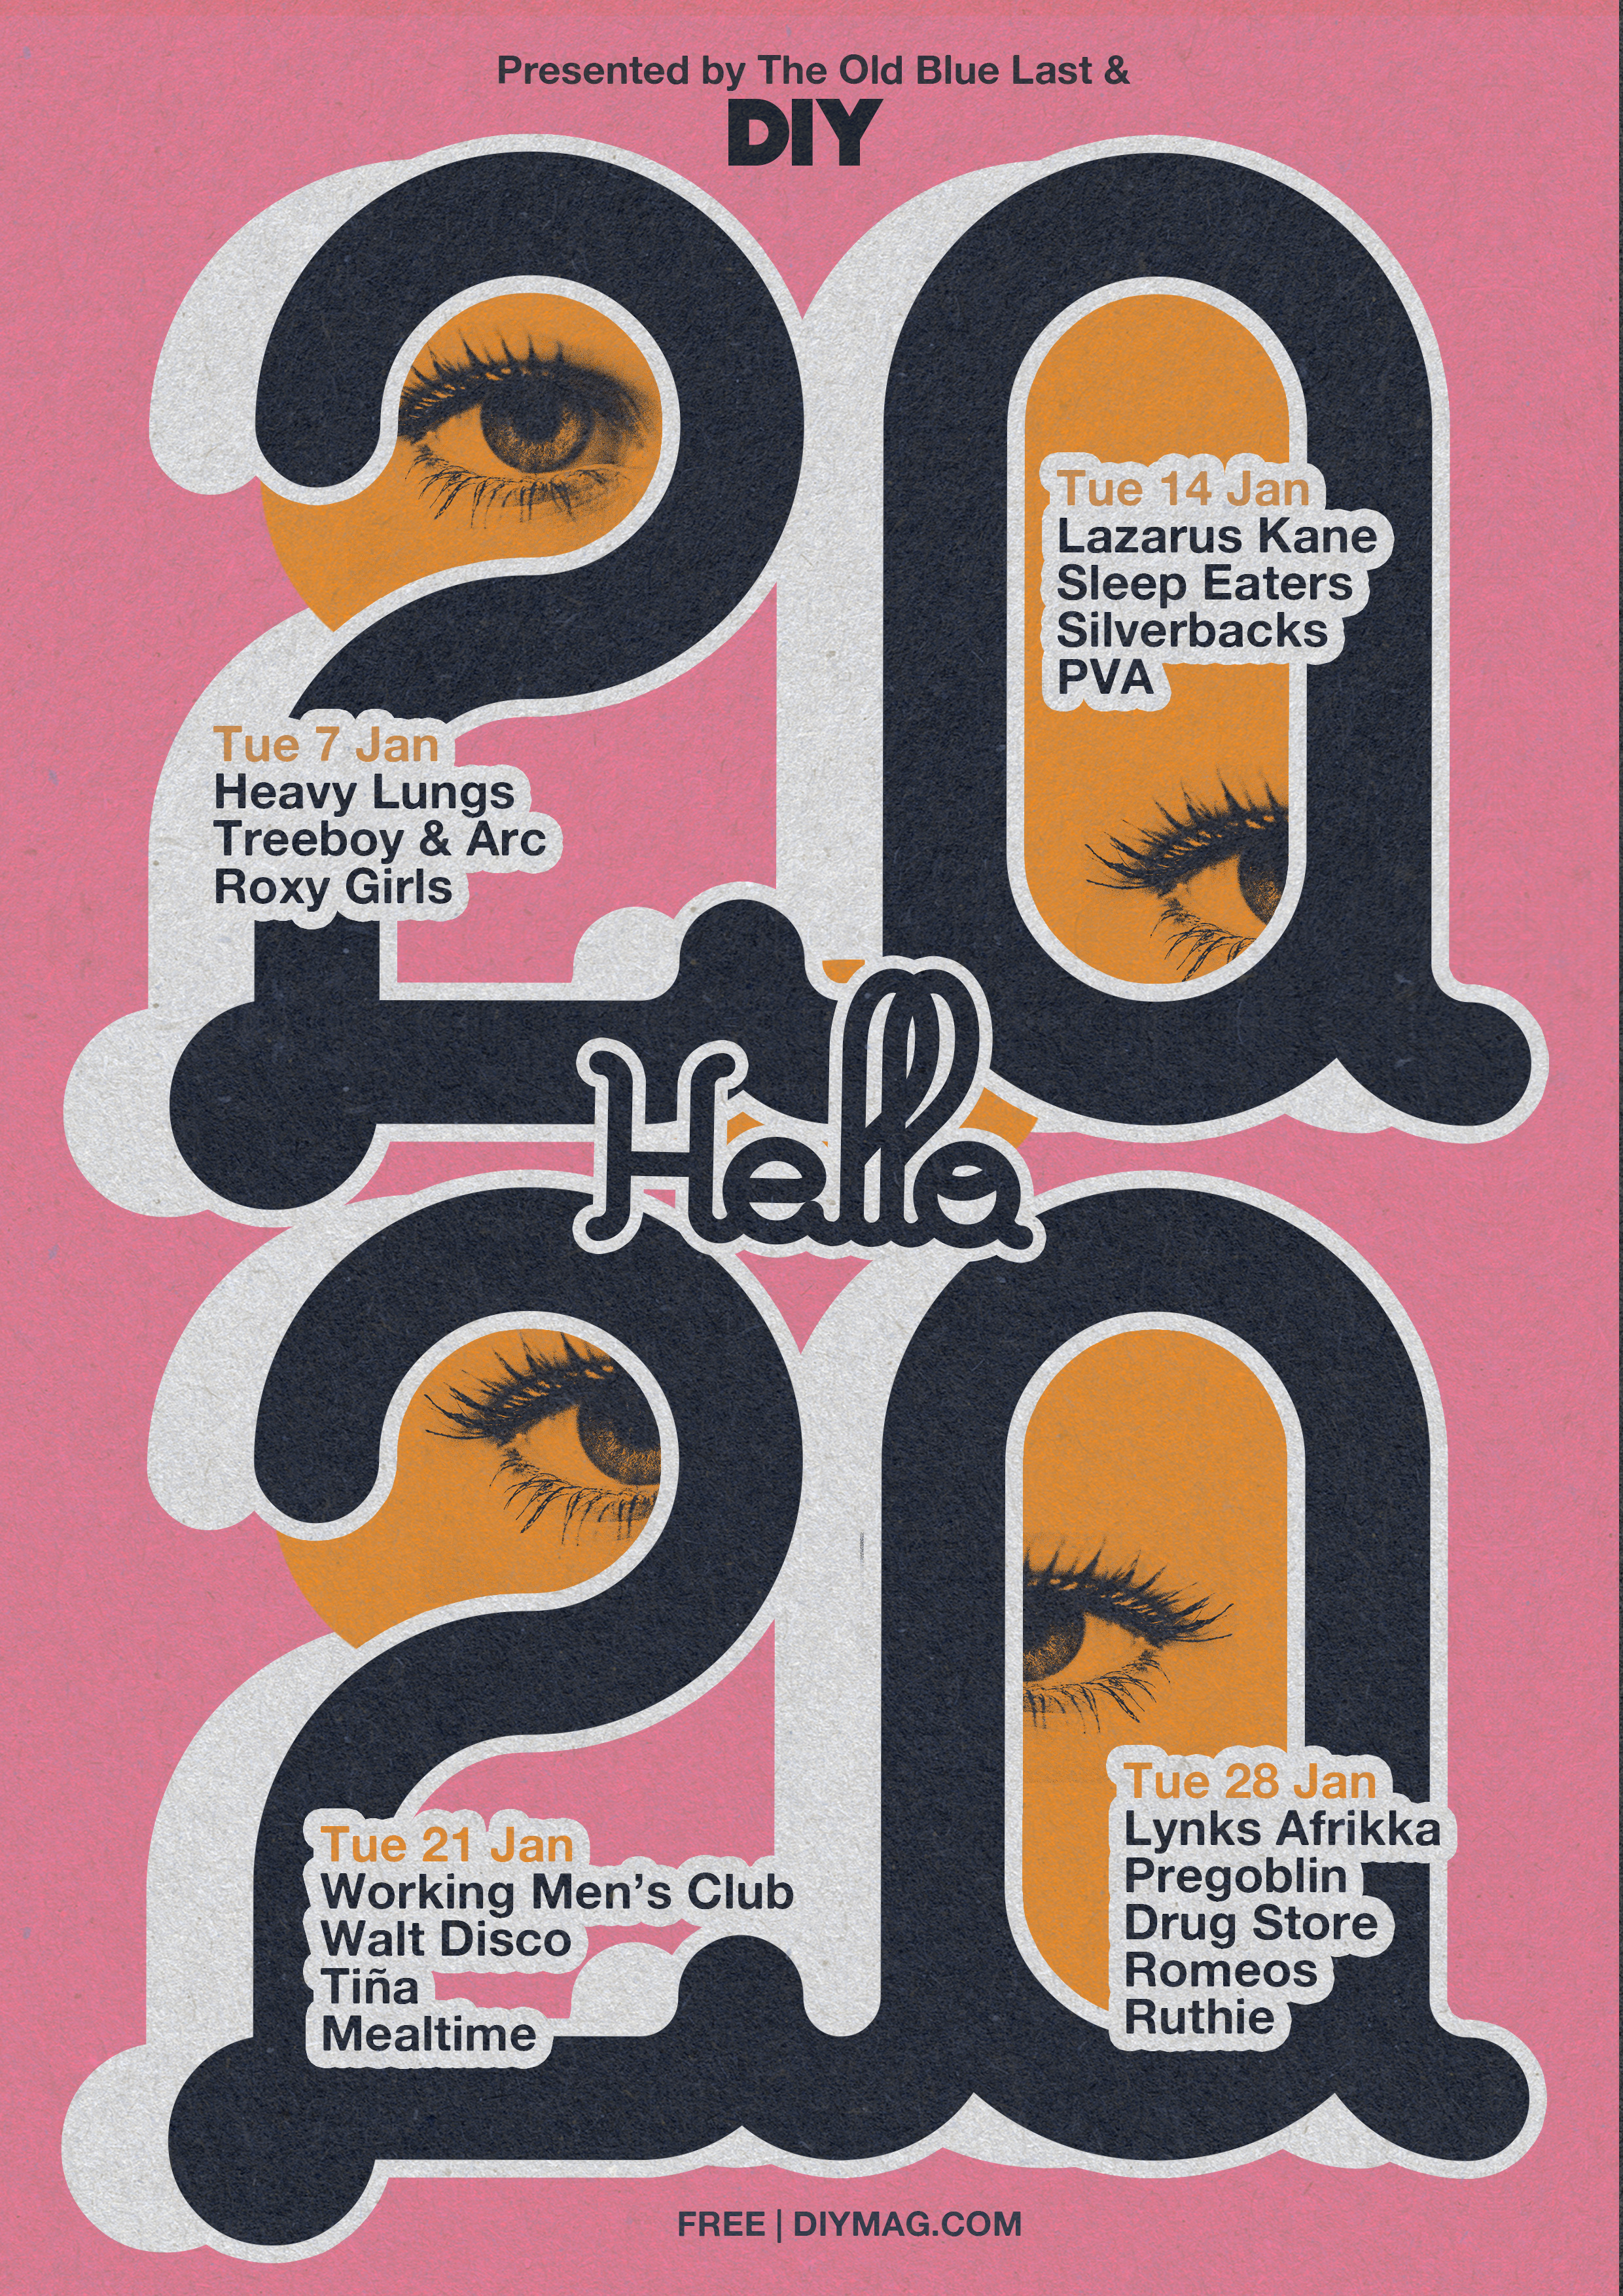 2020 Visions: Heavy Lungs, Lazarus Kane, Mealtime and more to play Hello 2020